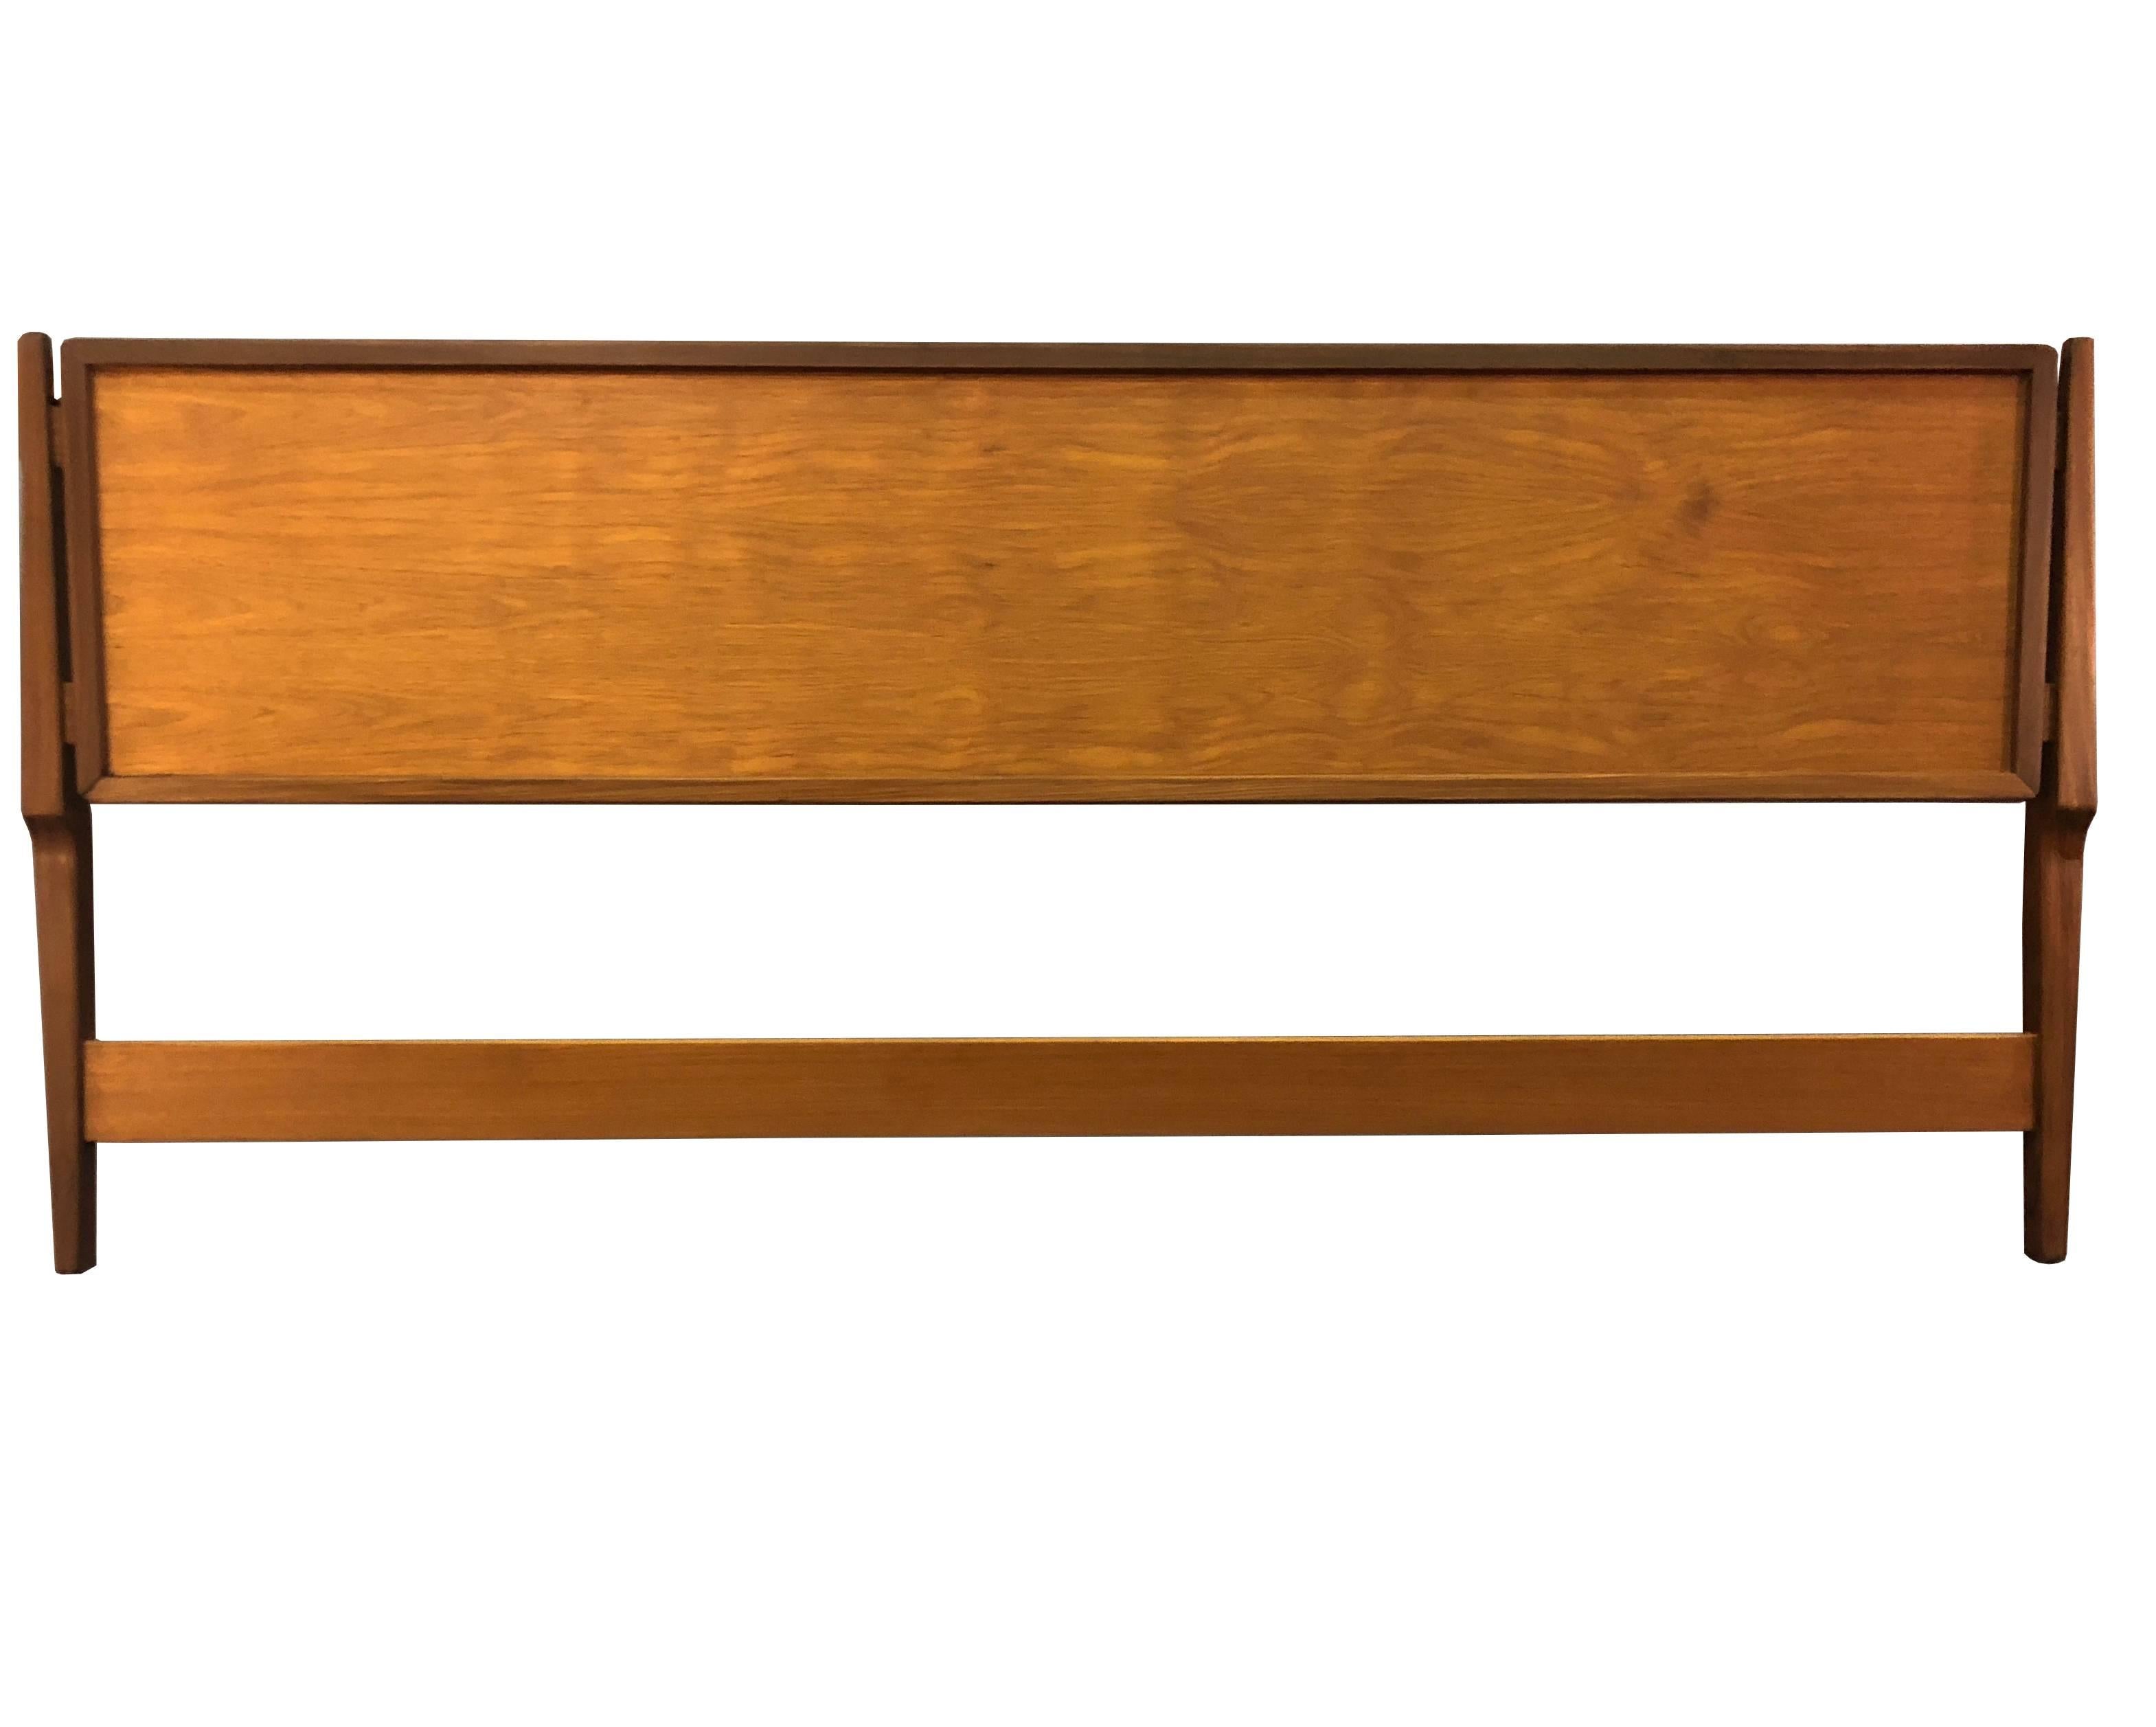 Mid-Century Modern 1960s Danish teak wood king-size headboard in newly refinished condition. Hardware is not included. Marked.